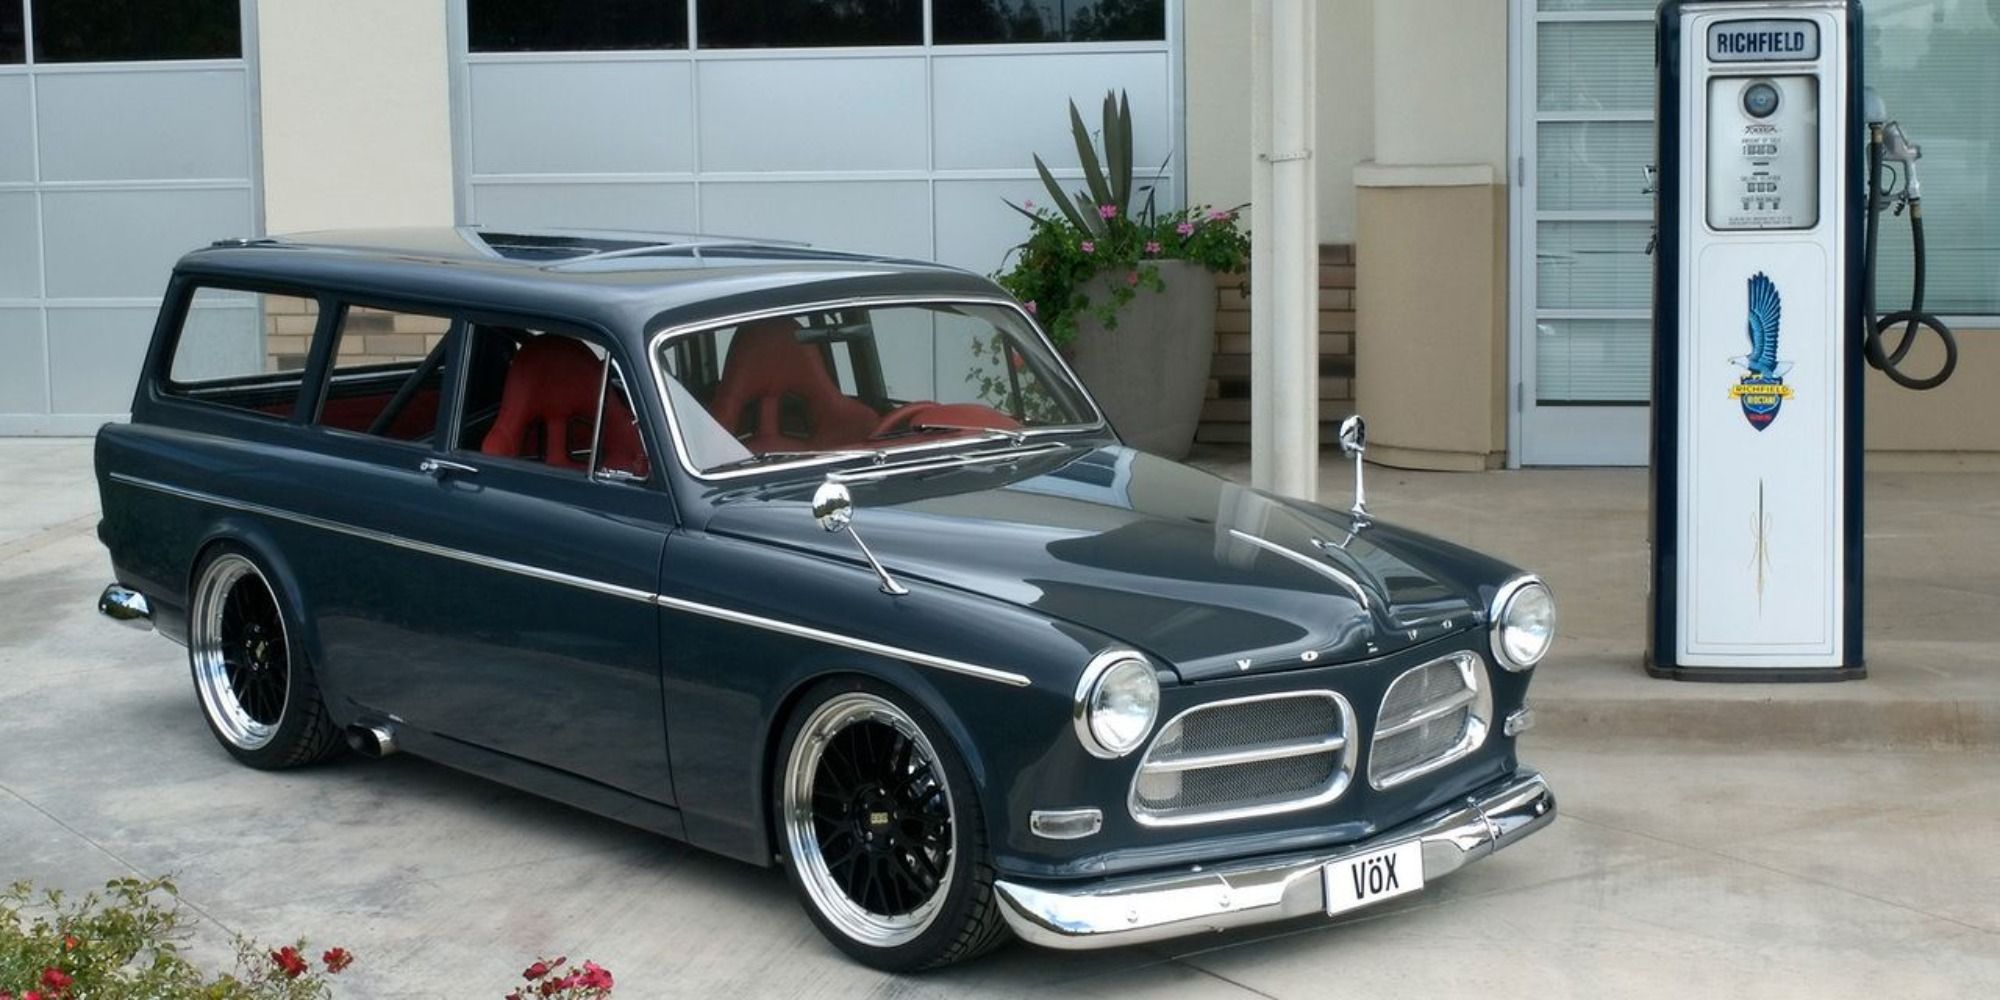 10 Best Looking Wagons Ever Made